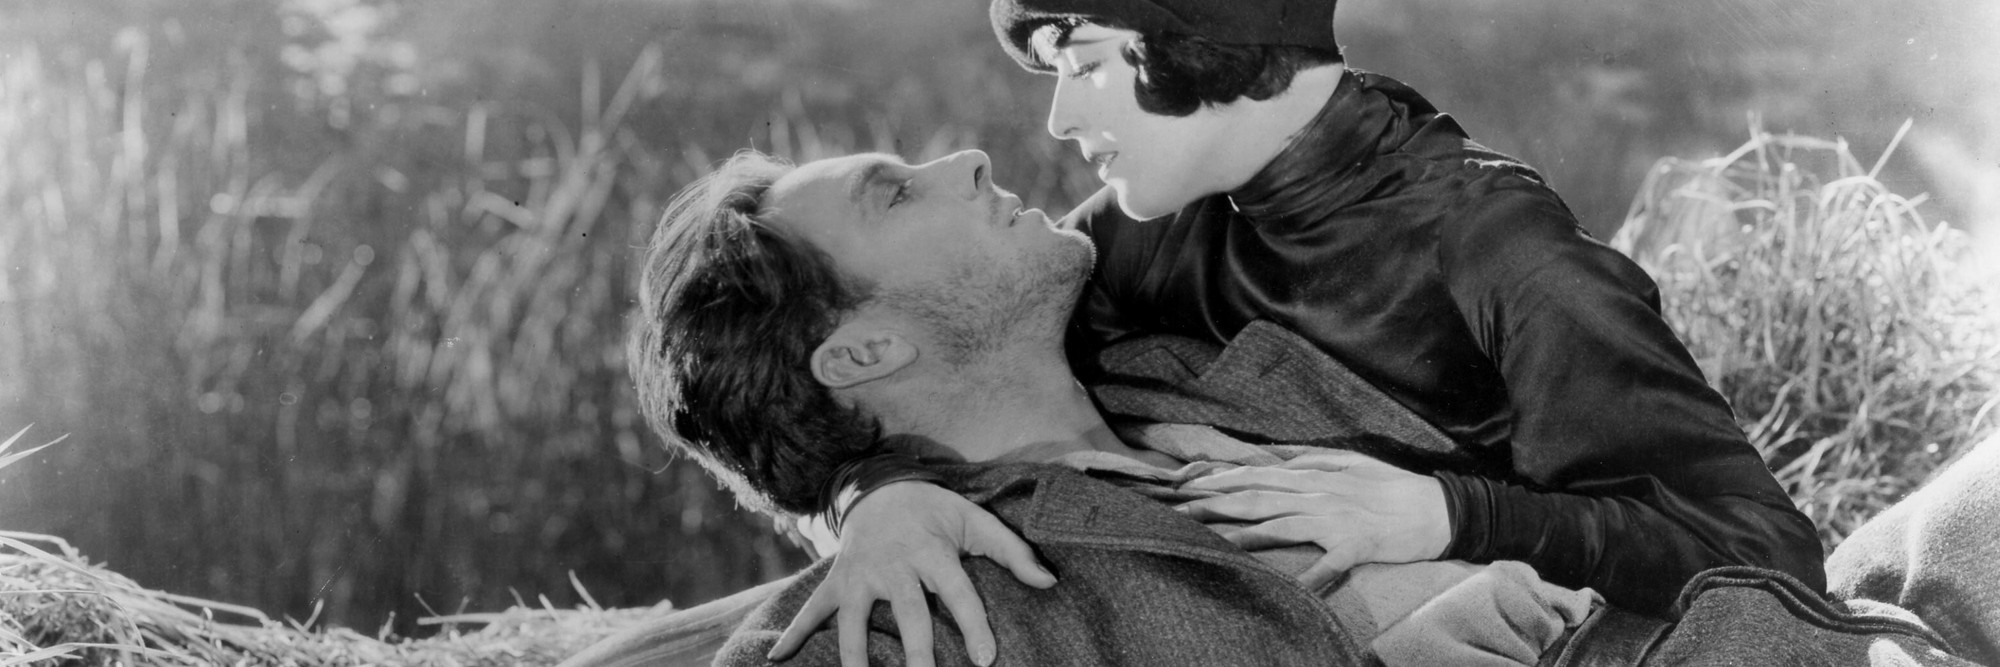 Sunrise: A Song of Two Humans. 1927. USA. Directed by F. W. Murnau. Courtesy Fox Film Corporation/Photofest